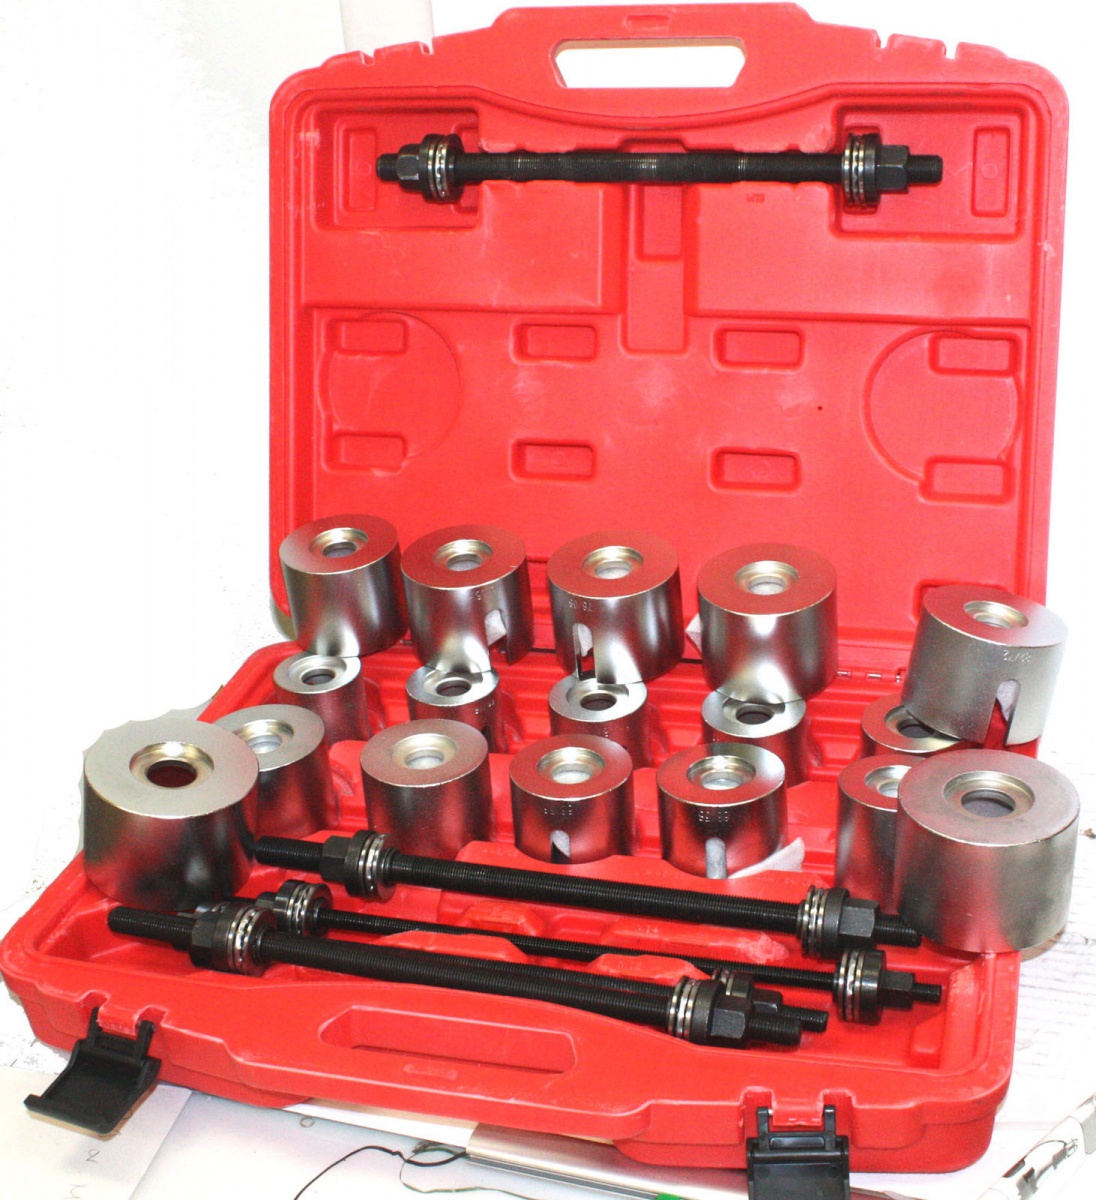 Press and Pull Sleeve Kit (XC3206)